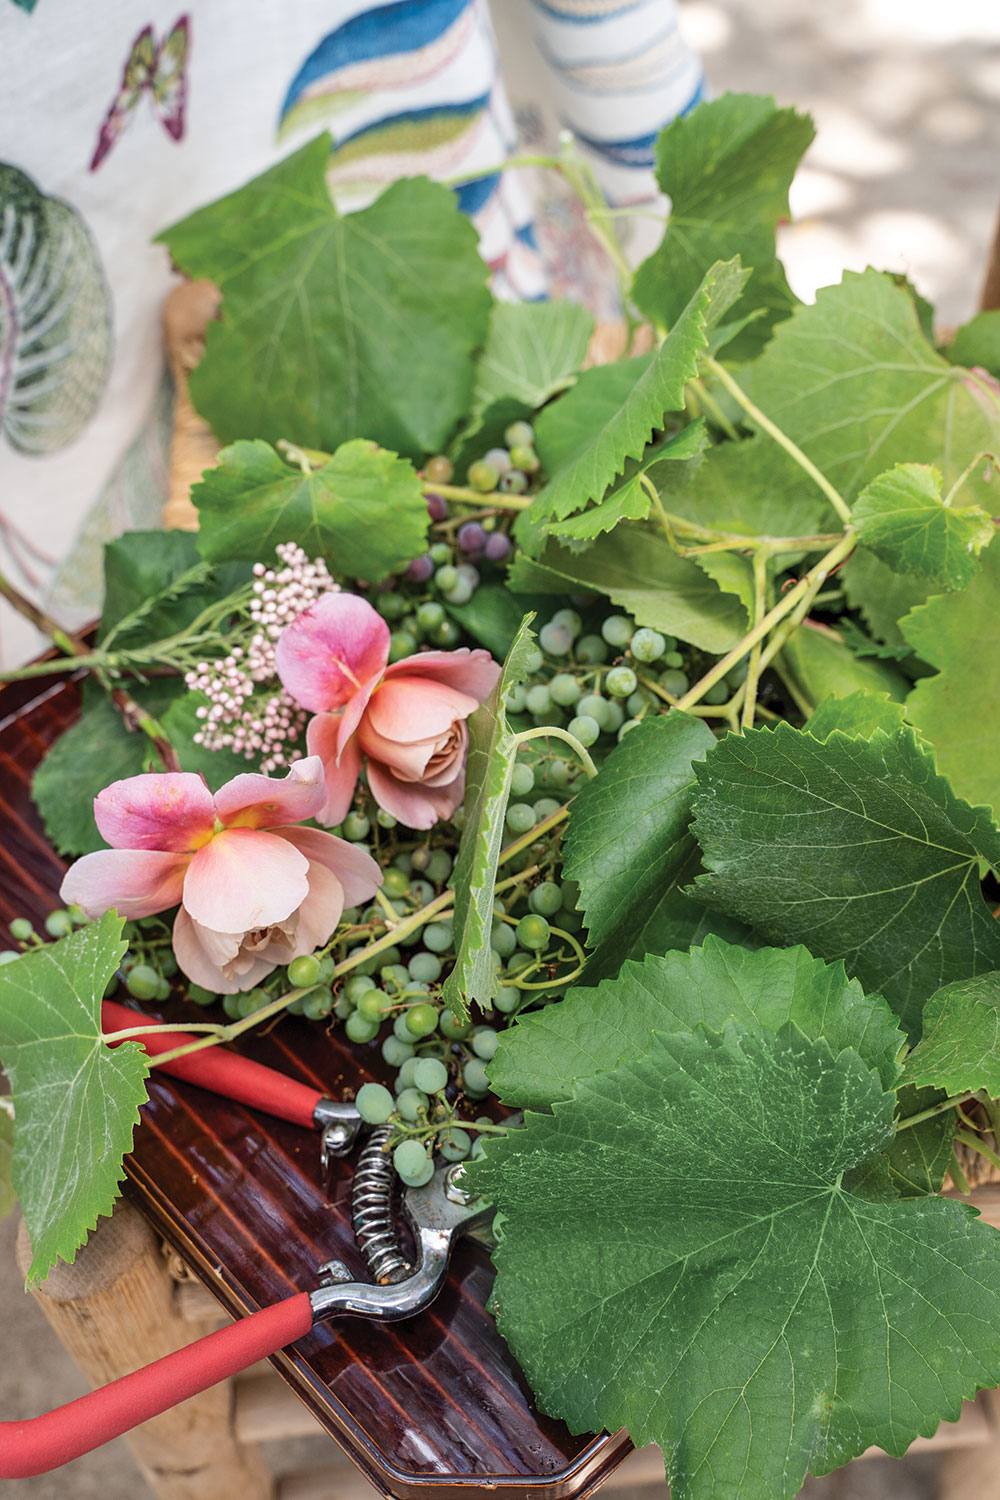 garden clippers, cuttings of grapes, leaves, and flowers